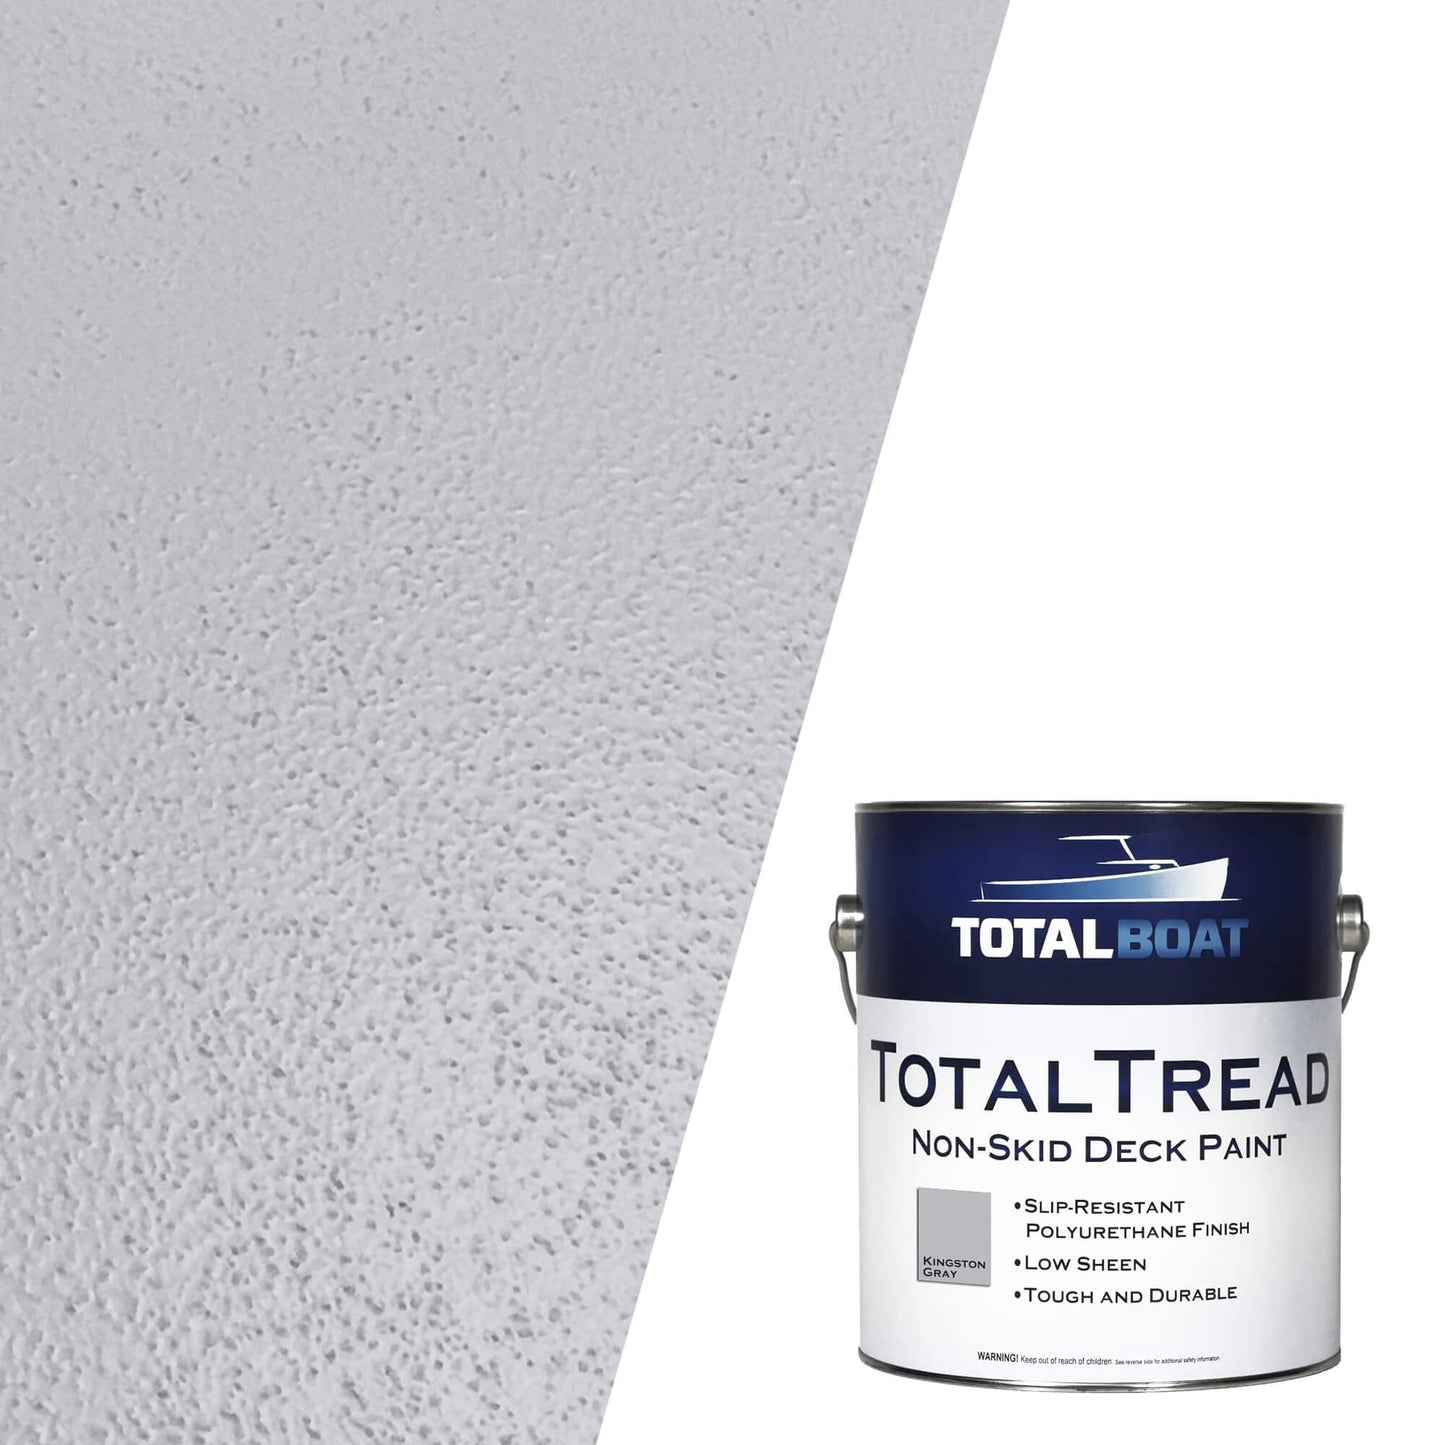 TotalBoat TotalTread Non-Skid Marine Deck Paint Kingston Gray Swatch